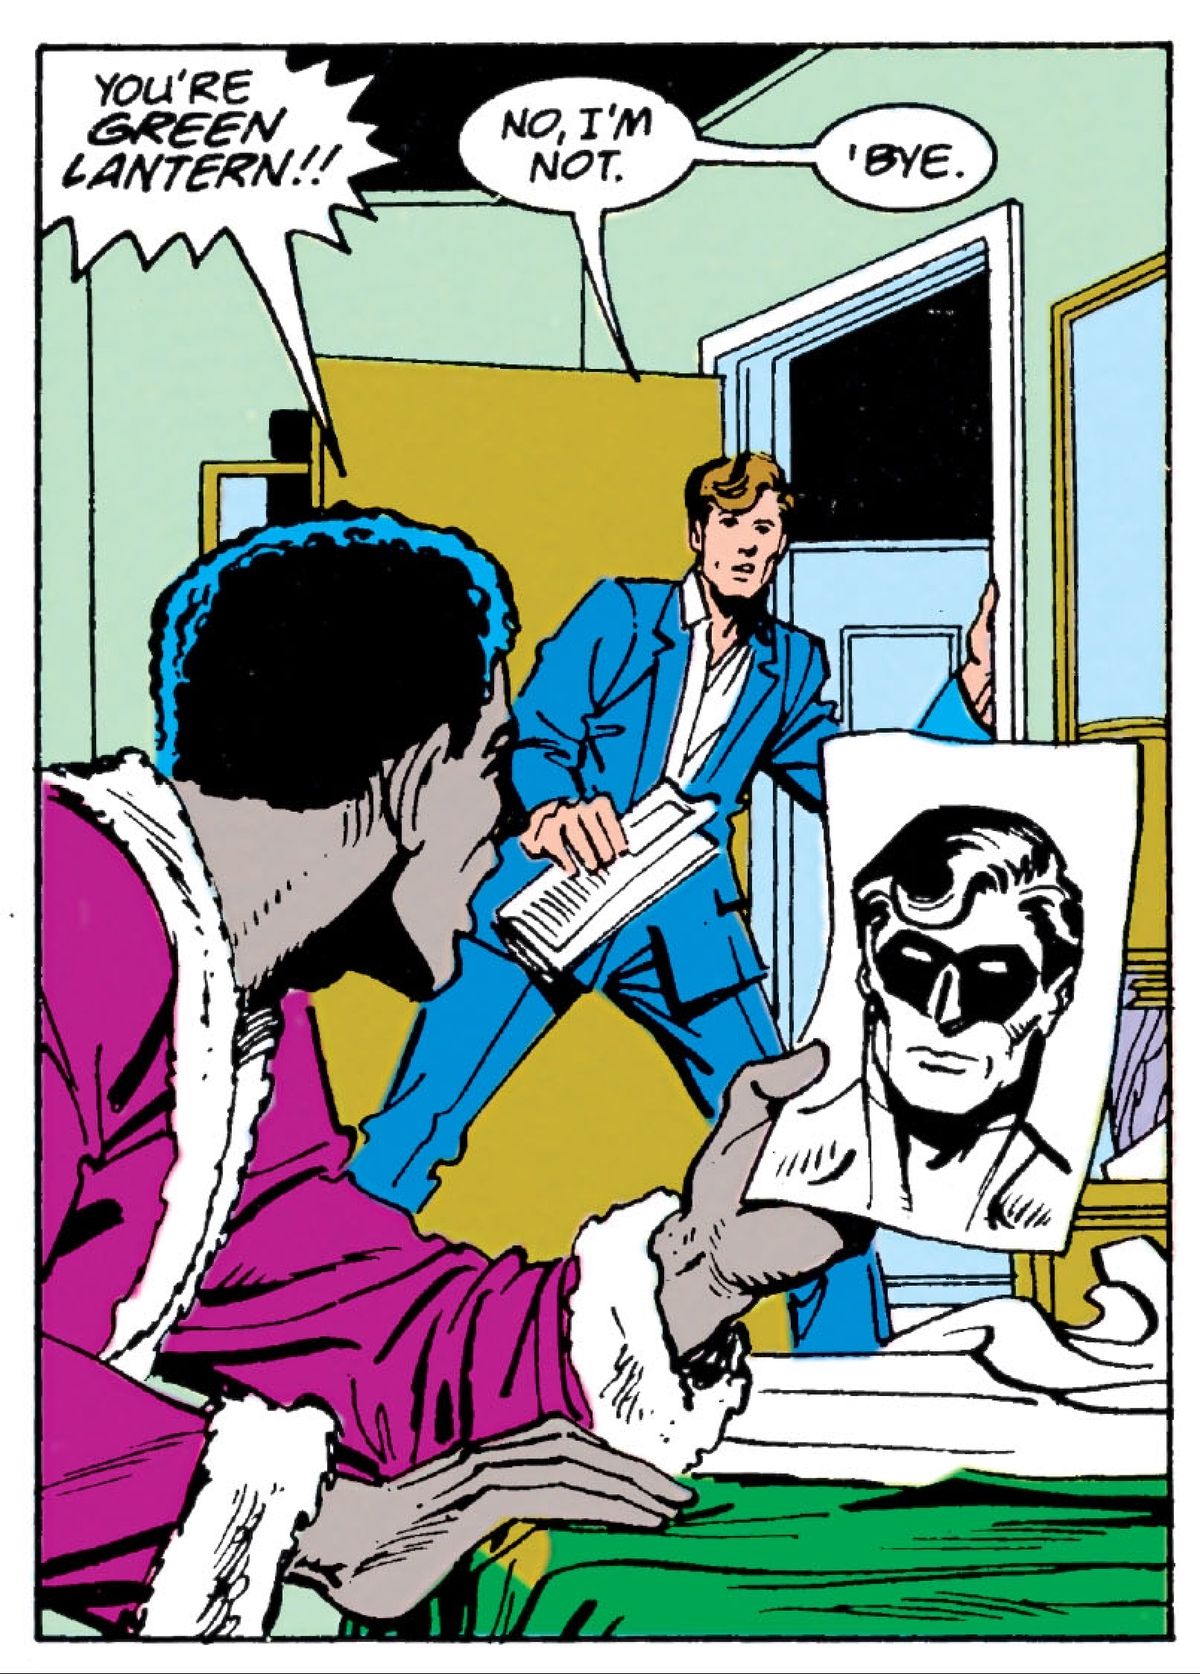 “You’re Green Lantern!!” cries a man holding a portrait of Green Lantern. “No, I’m not. ‘Bye.” Hal Jordan says while stepping out of the door in Secret Origins #36, DC Comics (1988).